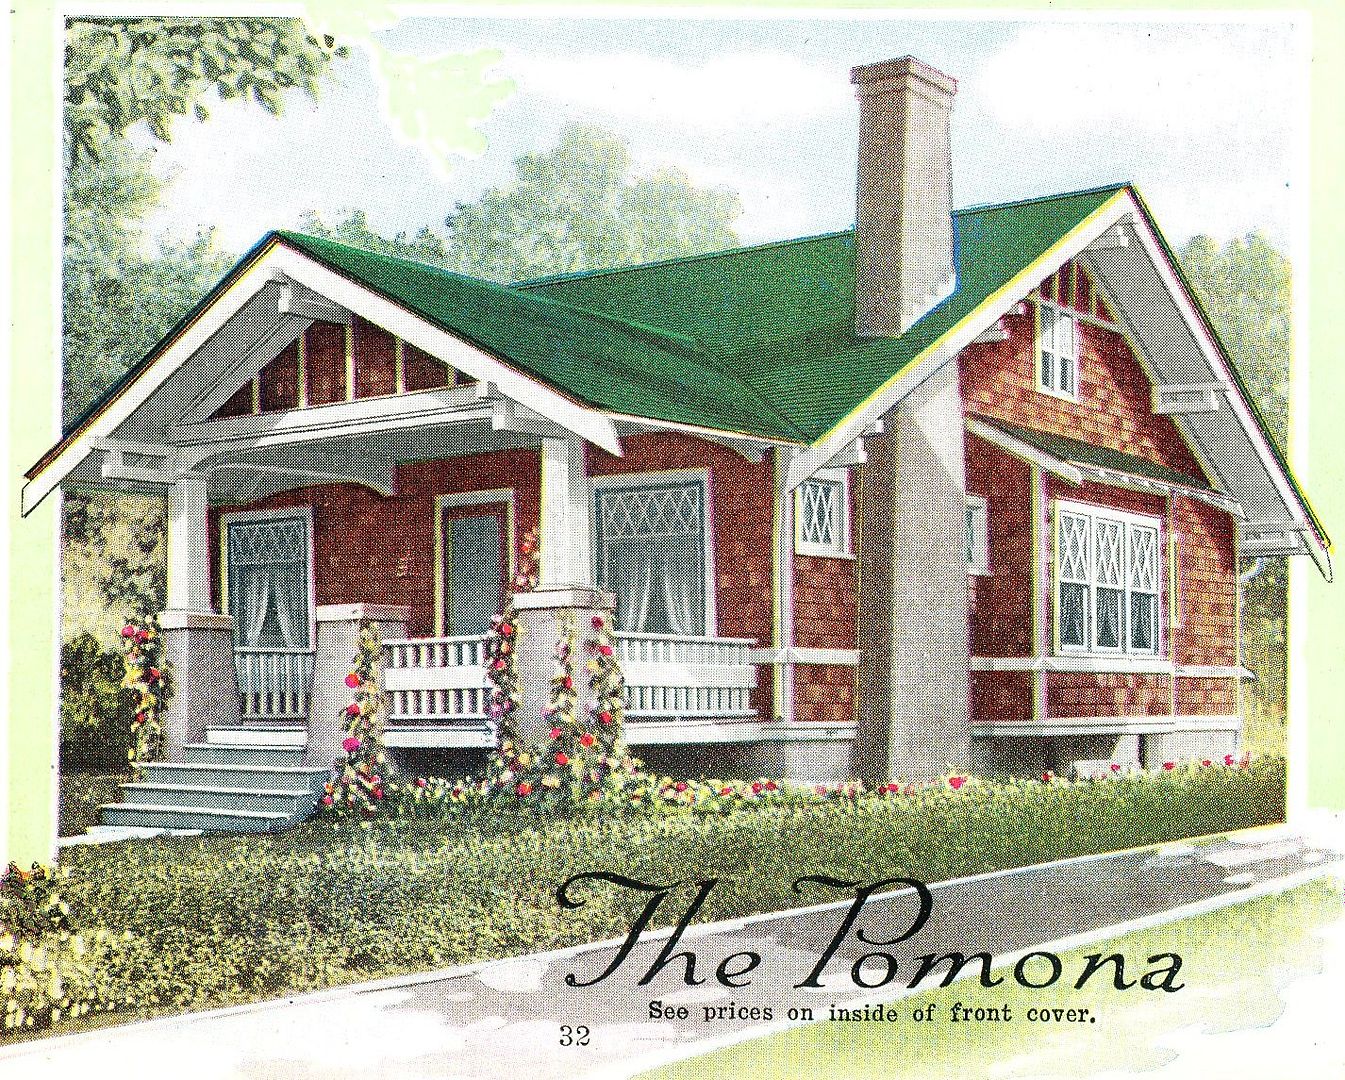 One of my favorite houses is the Aladdin Pomona